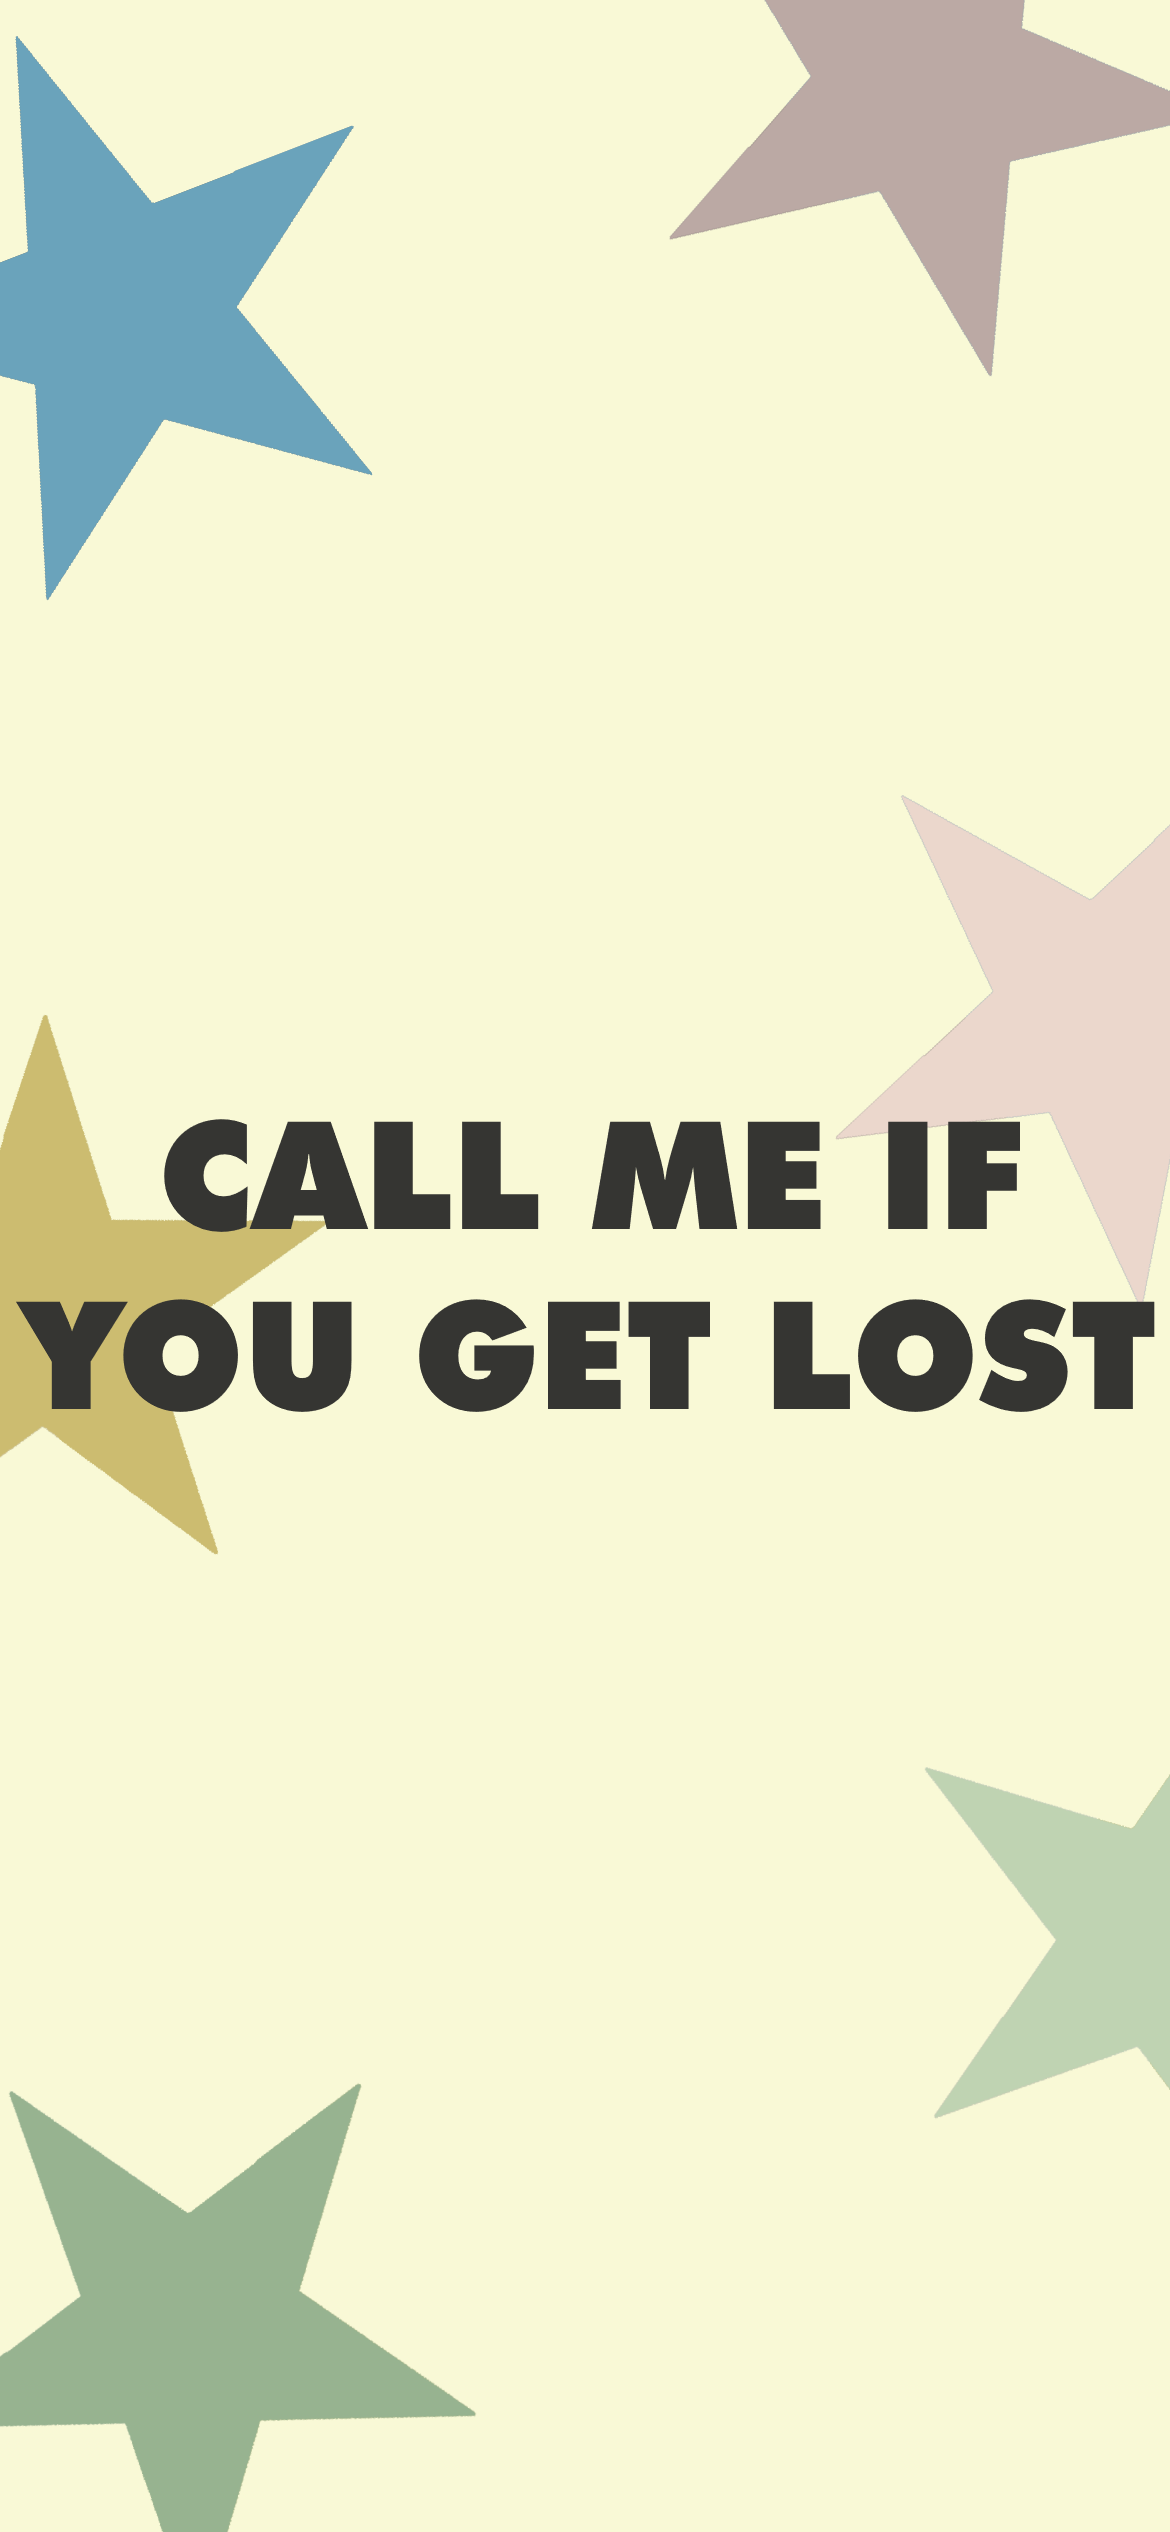 call me if you get lost vinyl poster